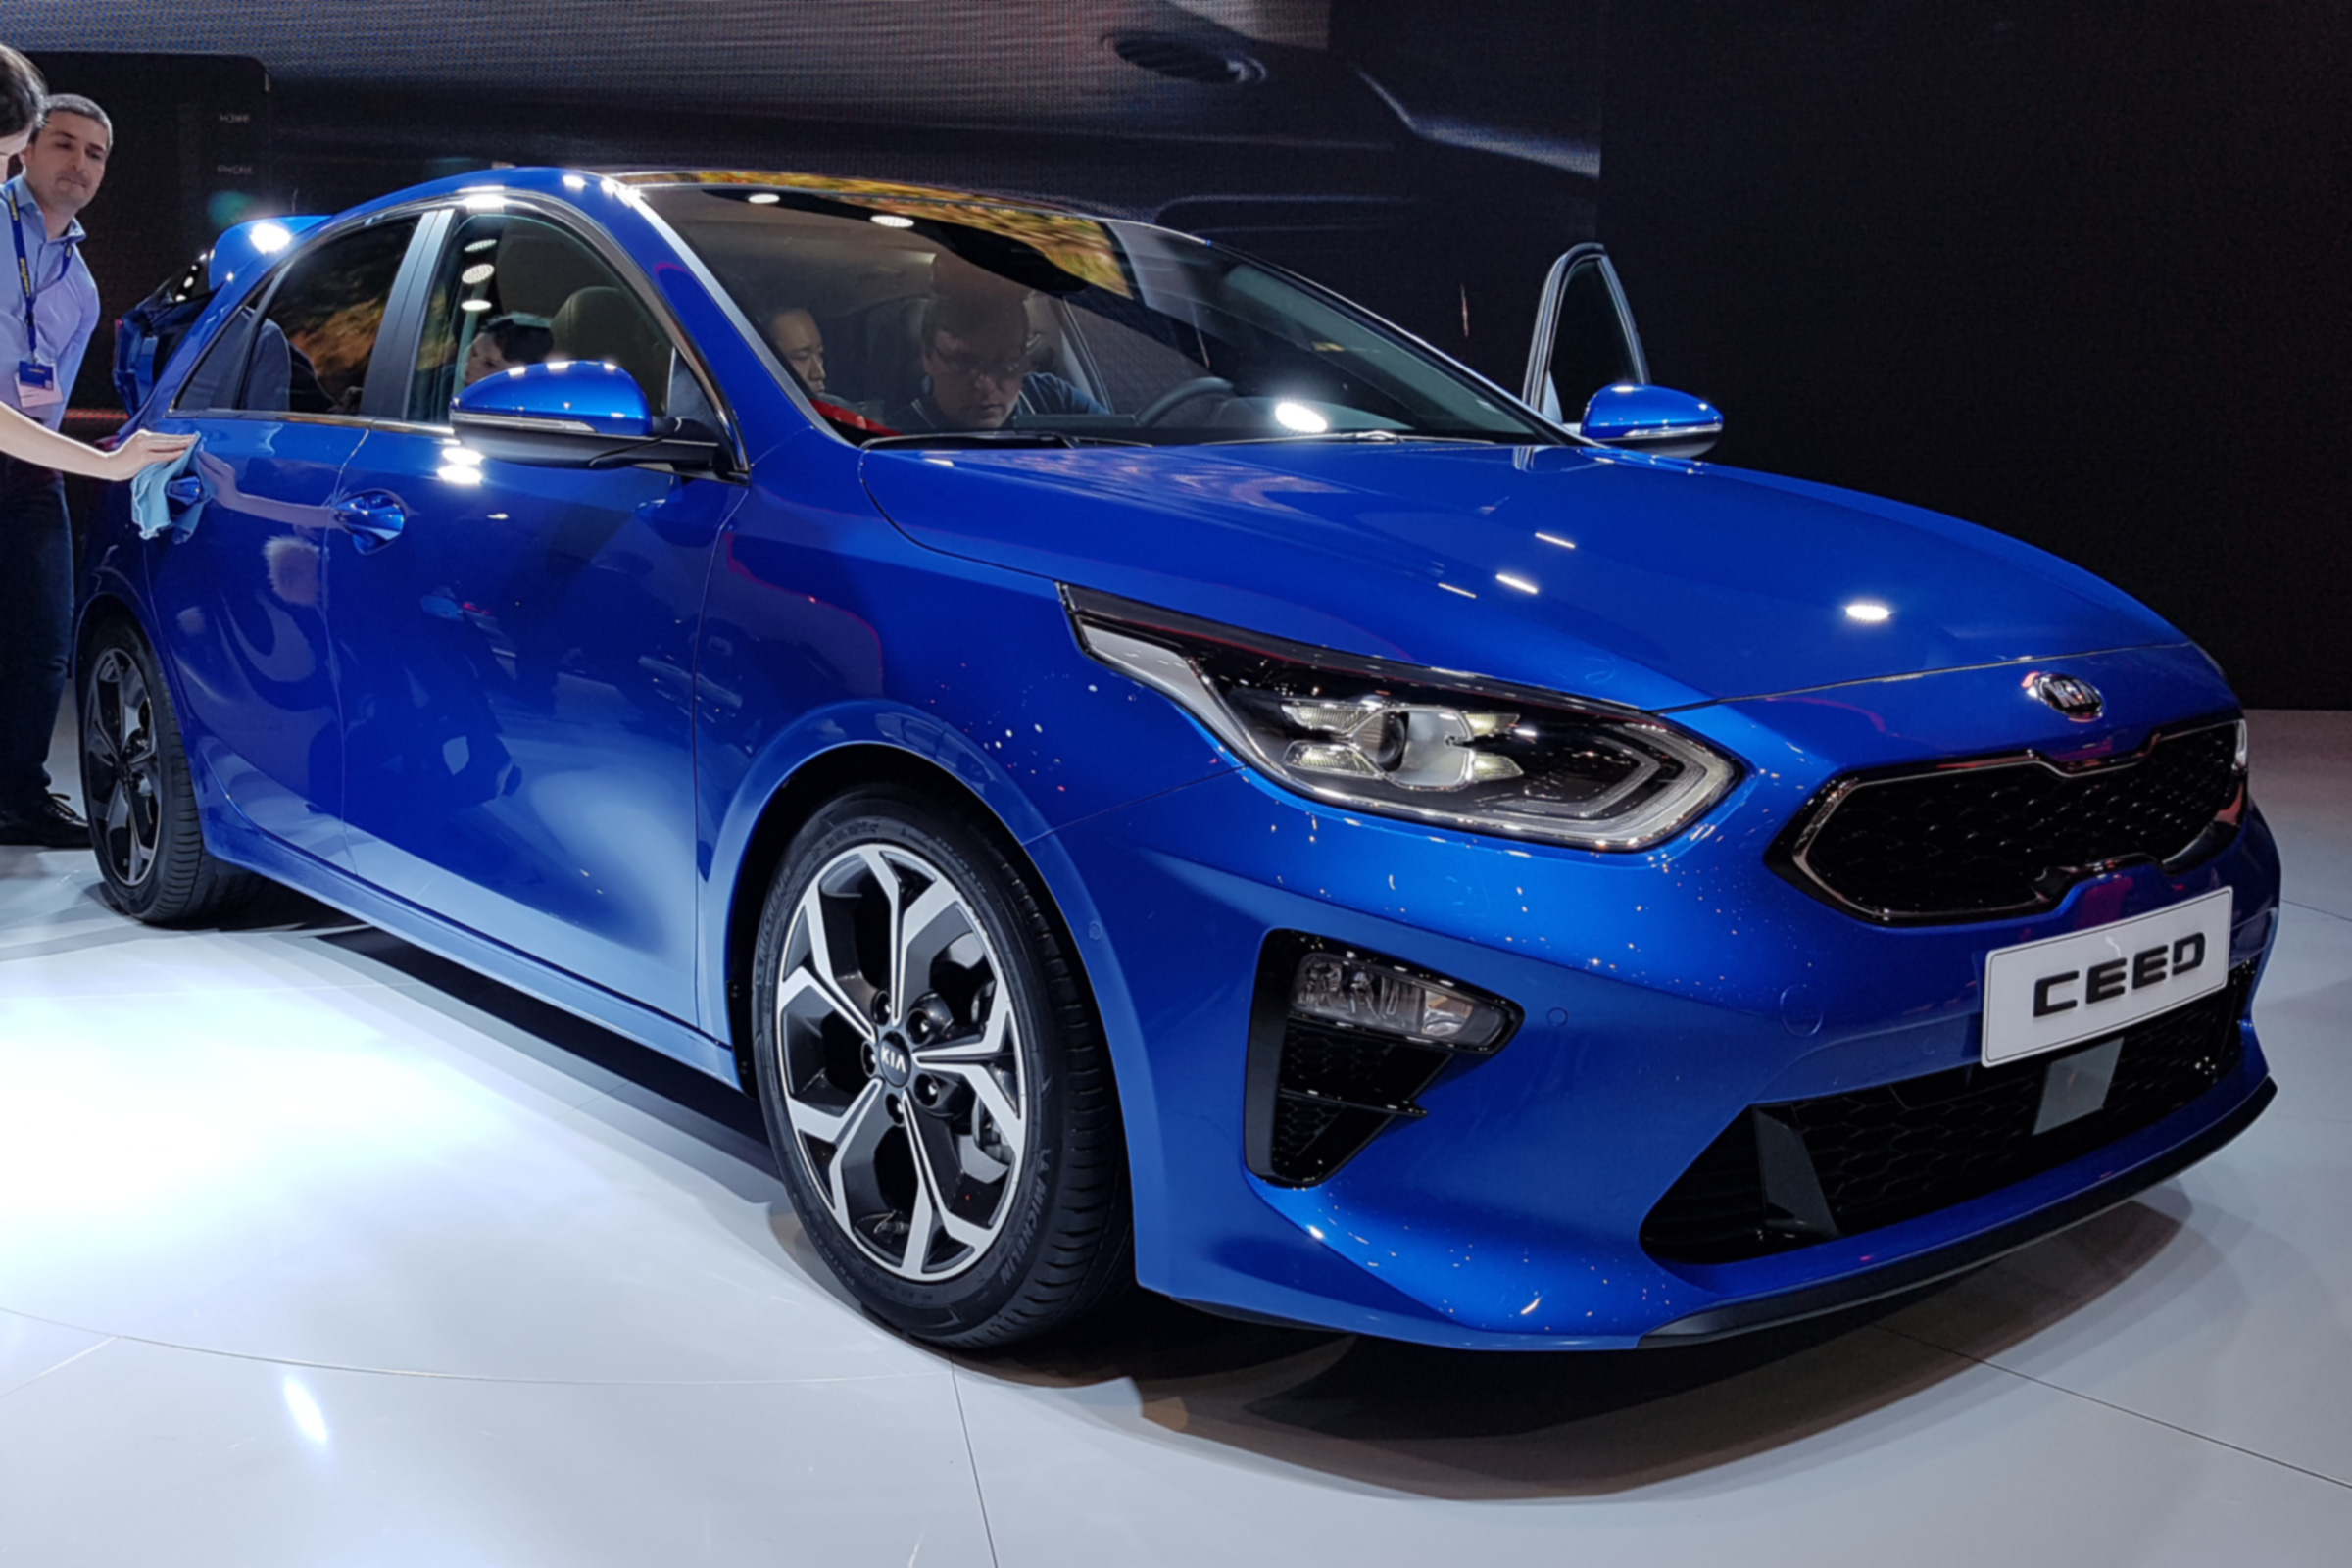 New Kia Ceed Prices And Specs On Sale Now From 18 295 Auto Express